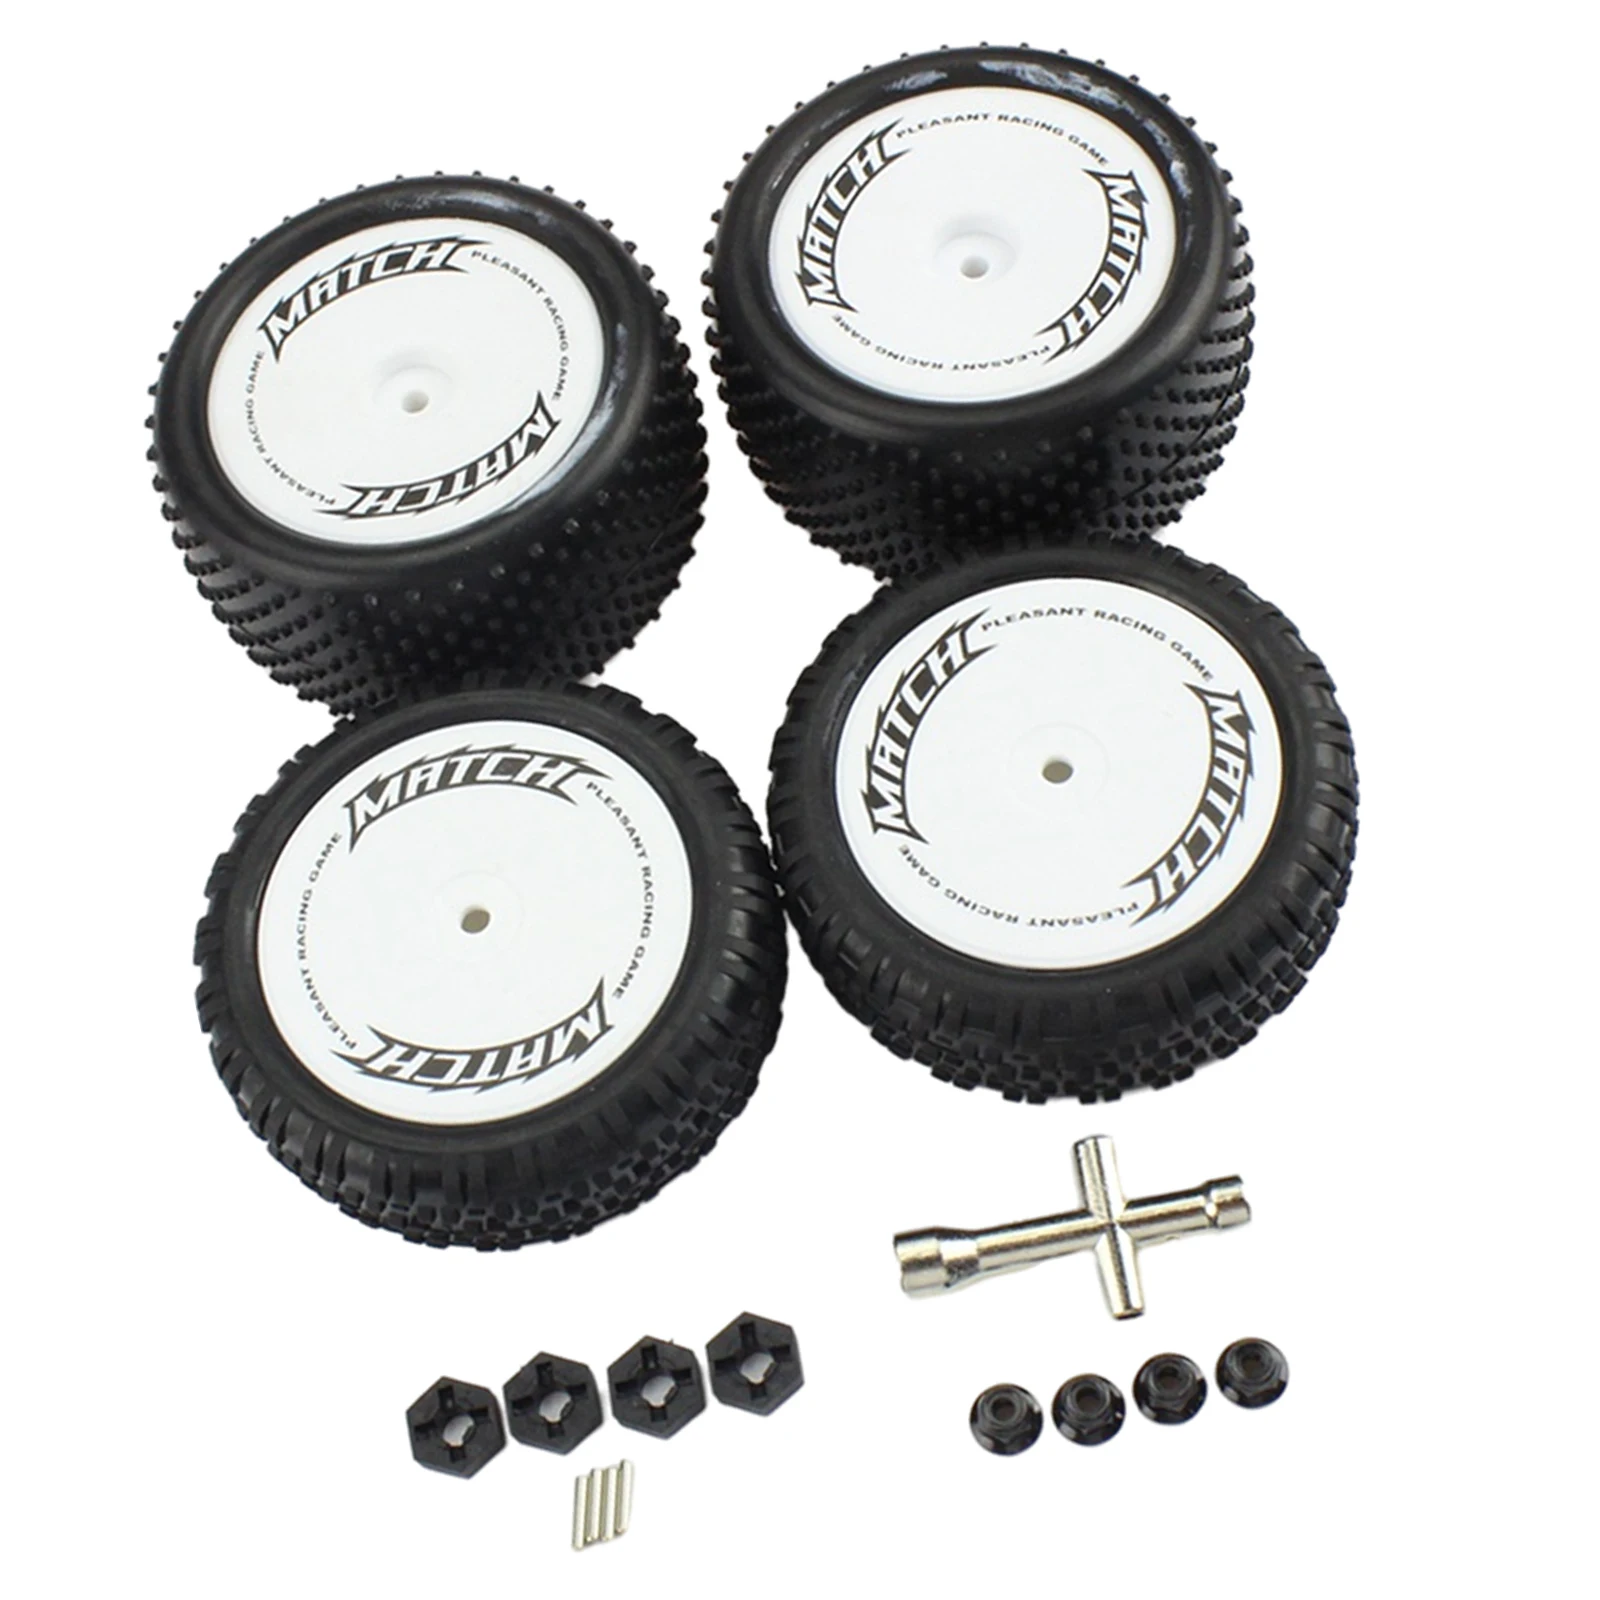 4Pack of 82.4mm Front and Rear Wheel Tires w/ Wrench Accessories for WLtoys 104001 Off Road Vehicles Buggy DIY Parts